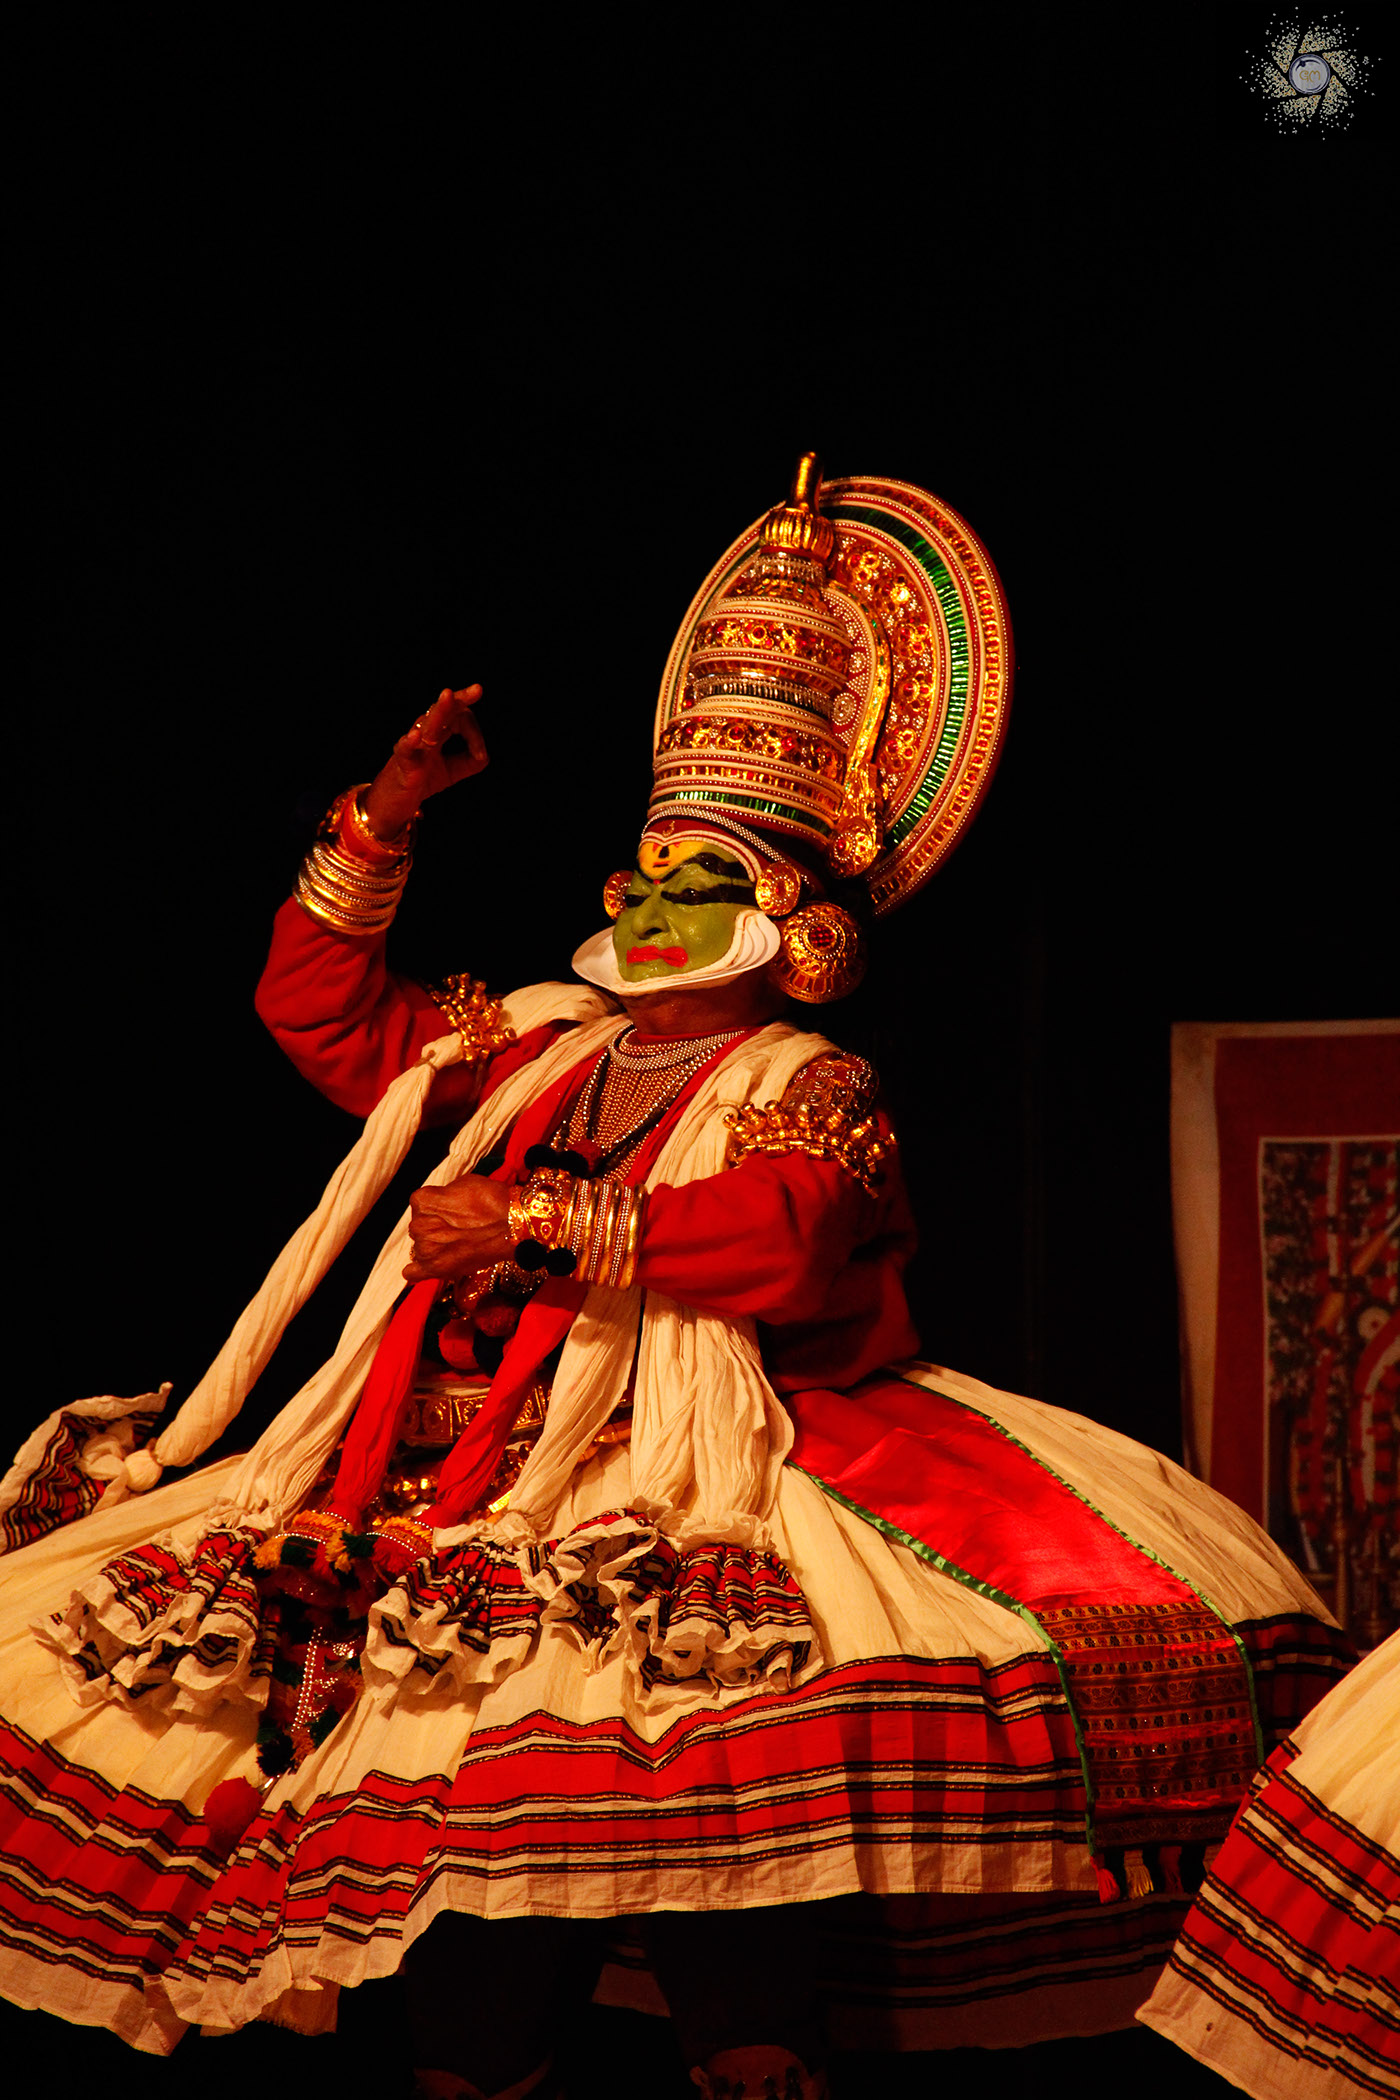 kathakali kerala culture heritage Photography  cultural photography into the village